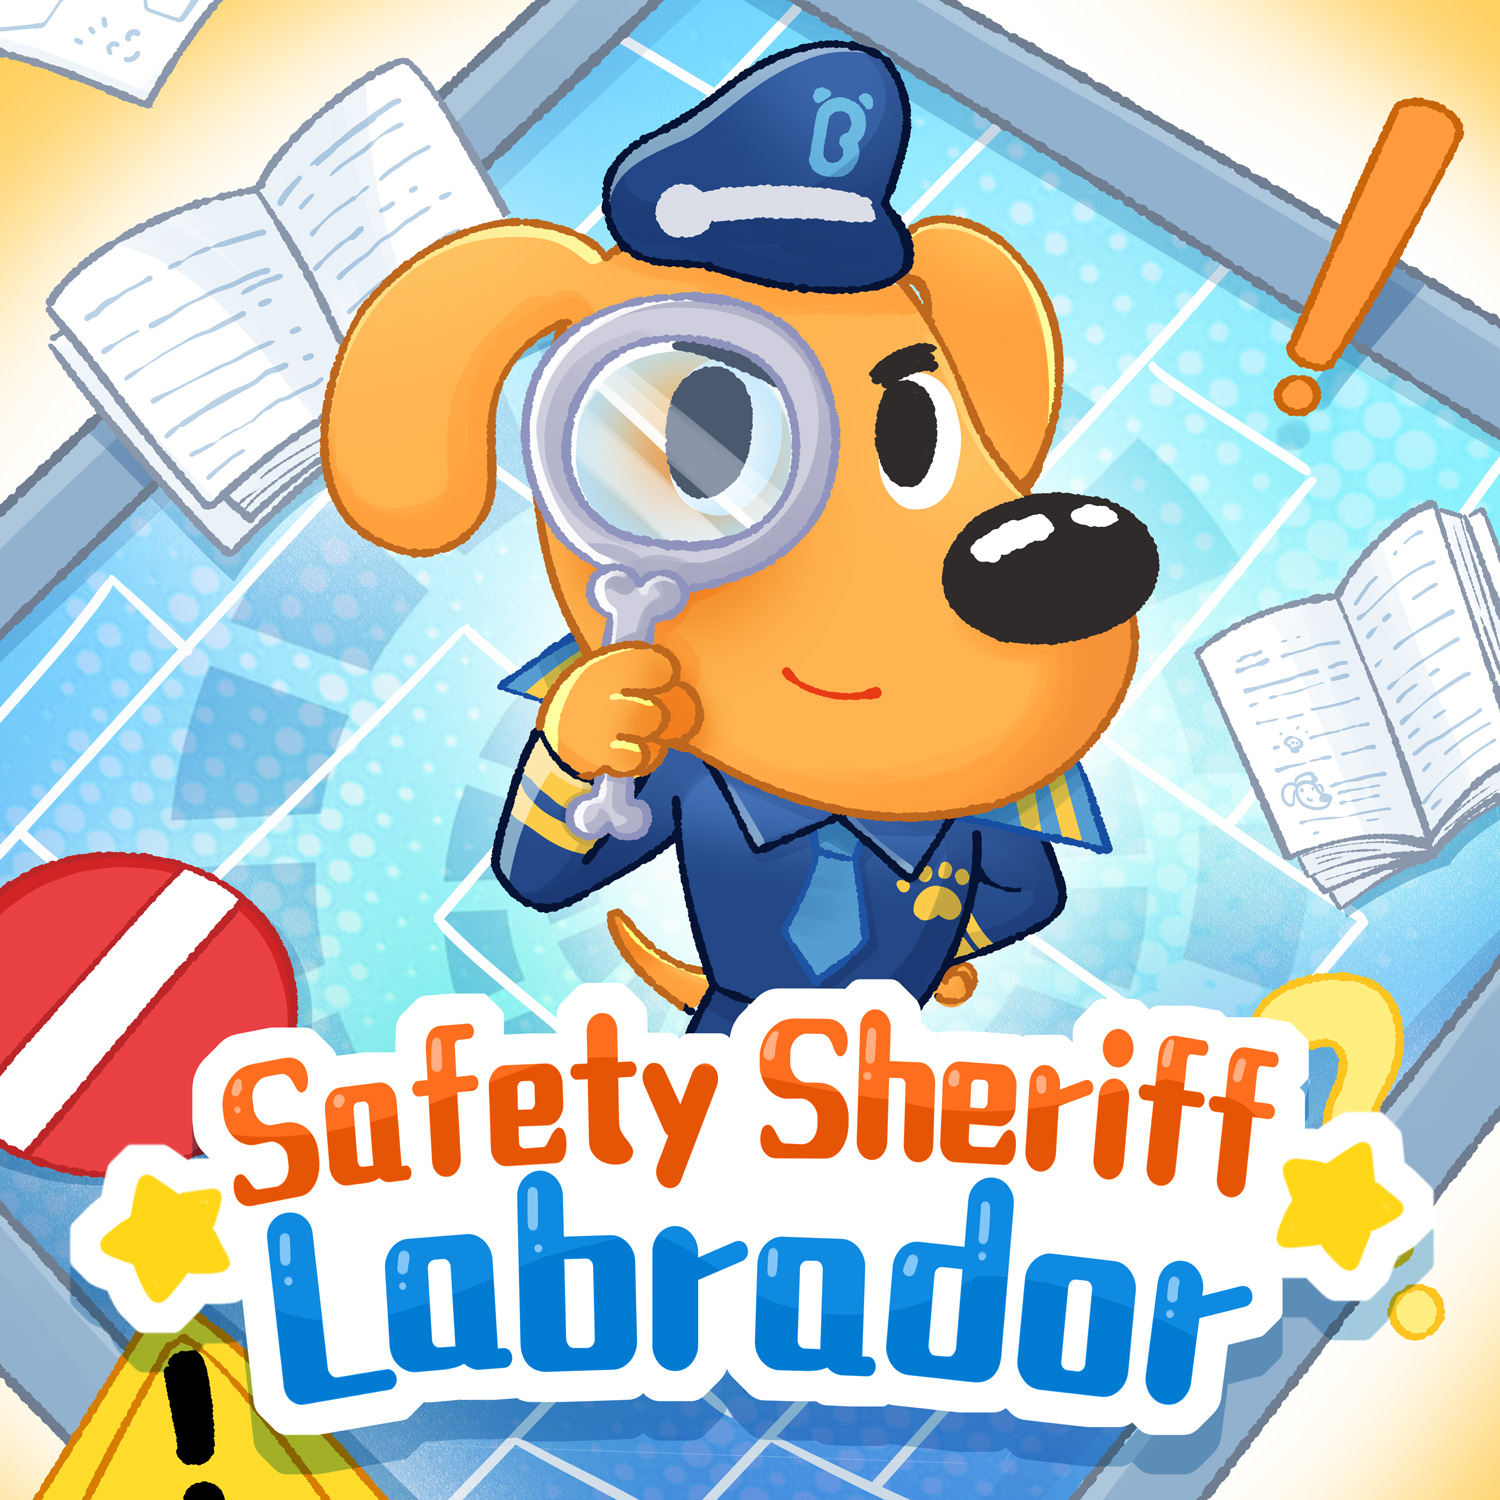 【Sheriff Labrador’s Safety Tip! 】🚨Wear Protection for the Hot Sun